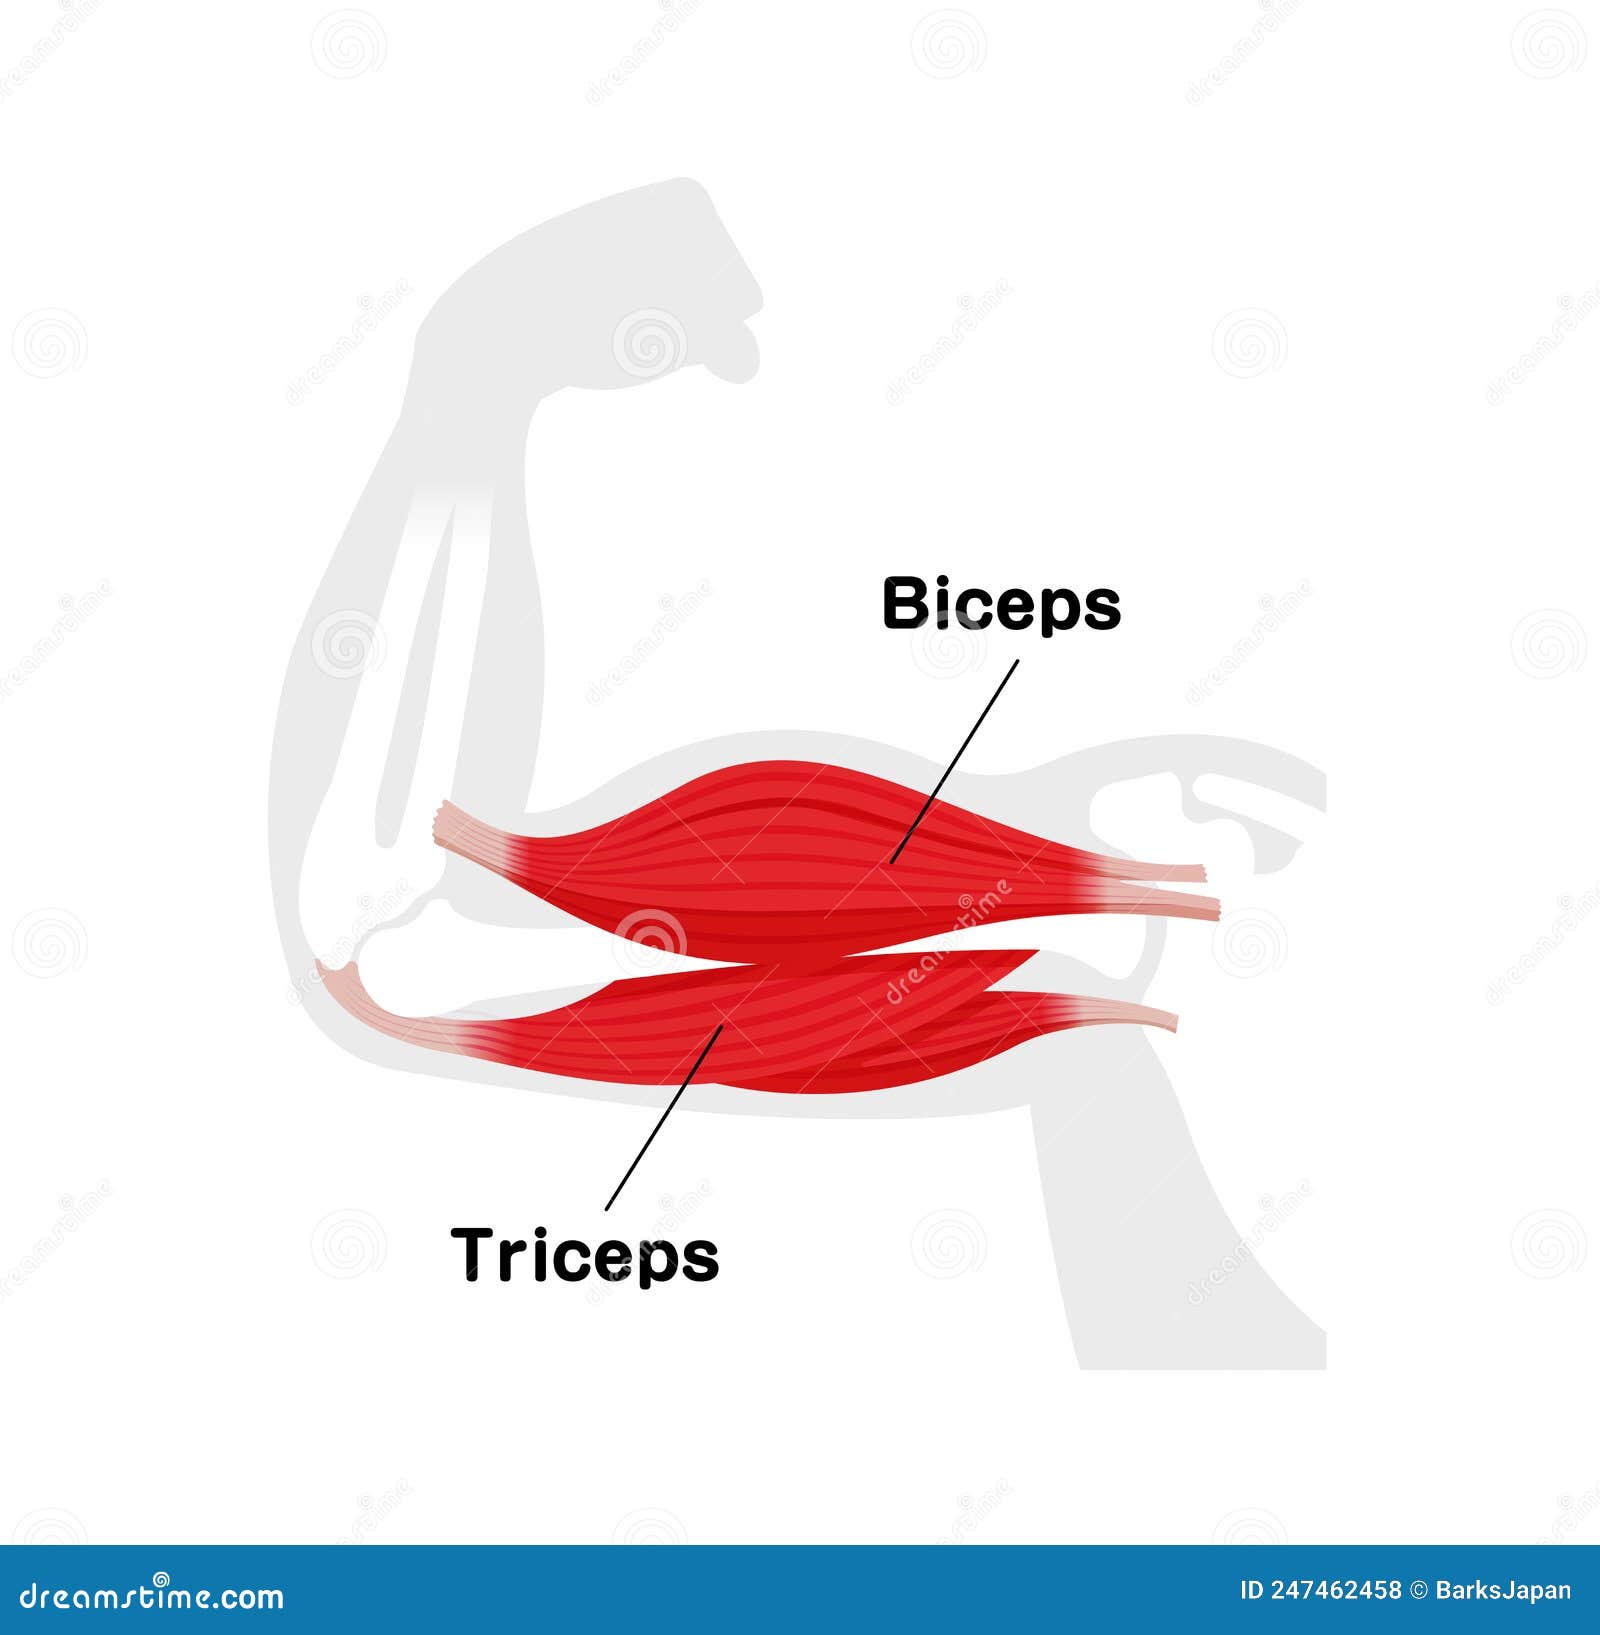 Arm Muscle Anatomical Illustration Biceps and Triceps Stock Vector